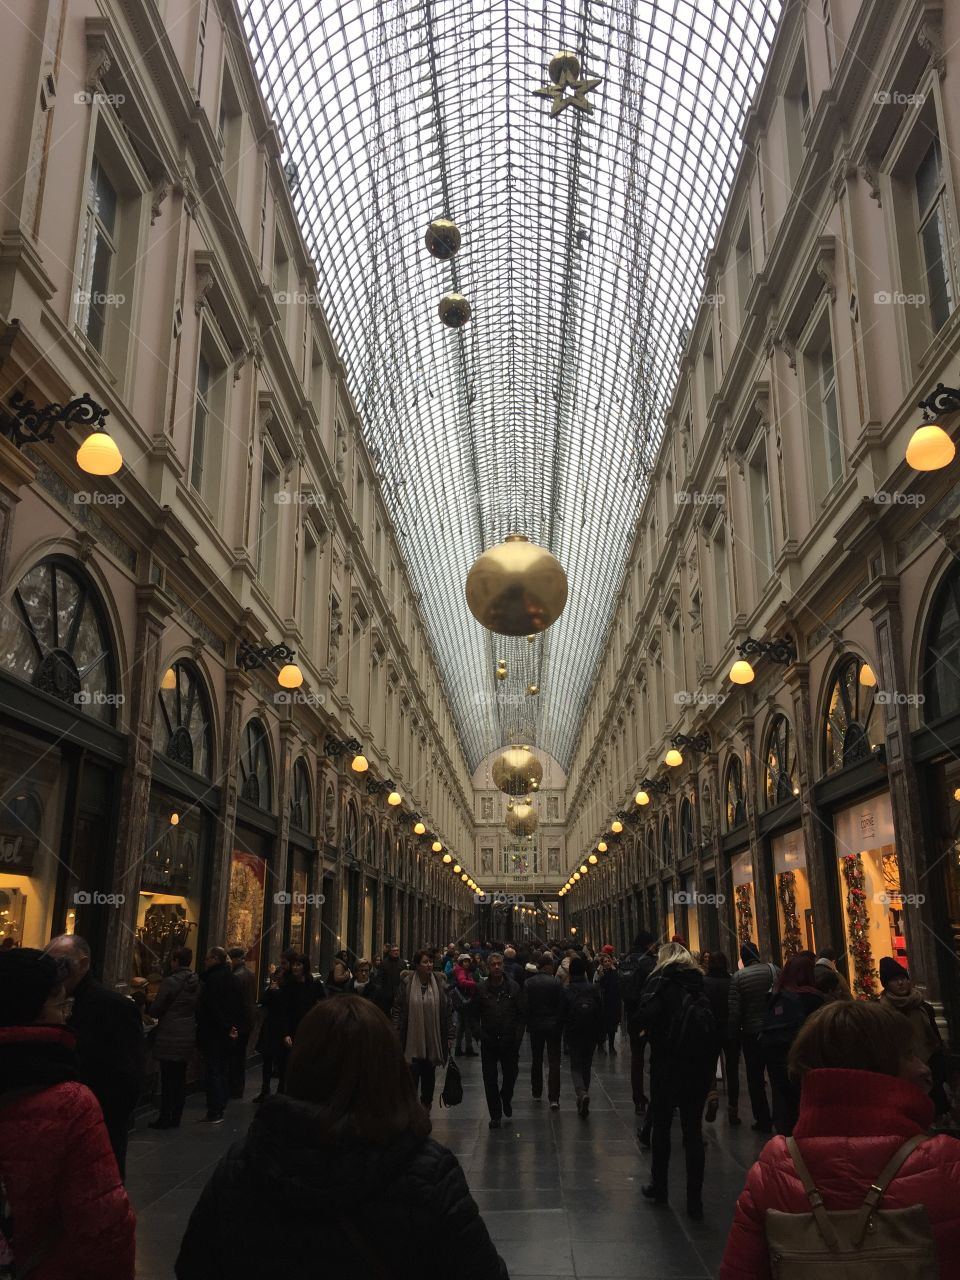 Brussels, Belgium Galeries Royales Saint-Hubert mall decorated for Christmas 2016 shopping.